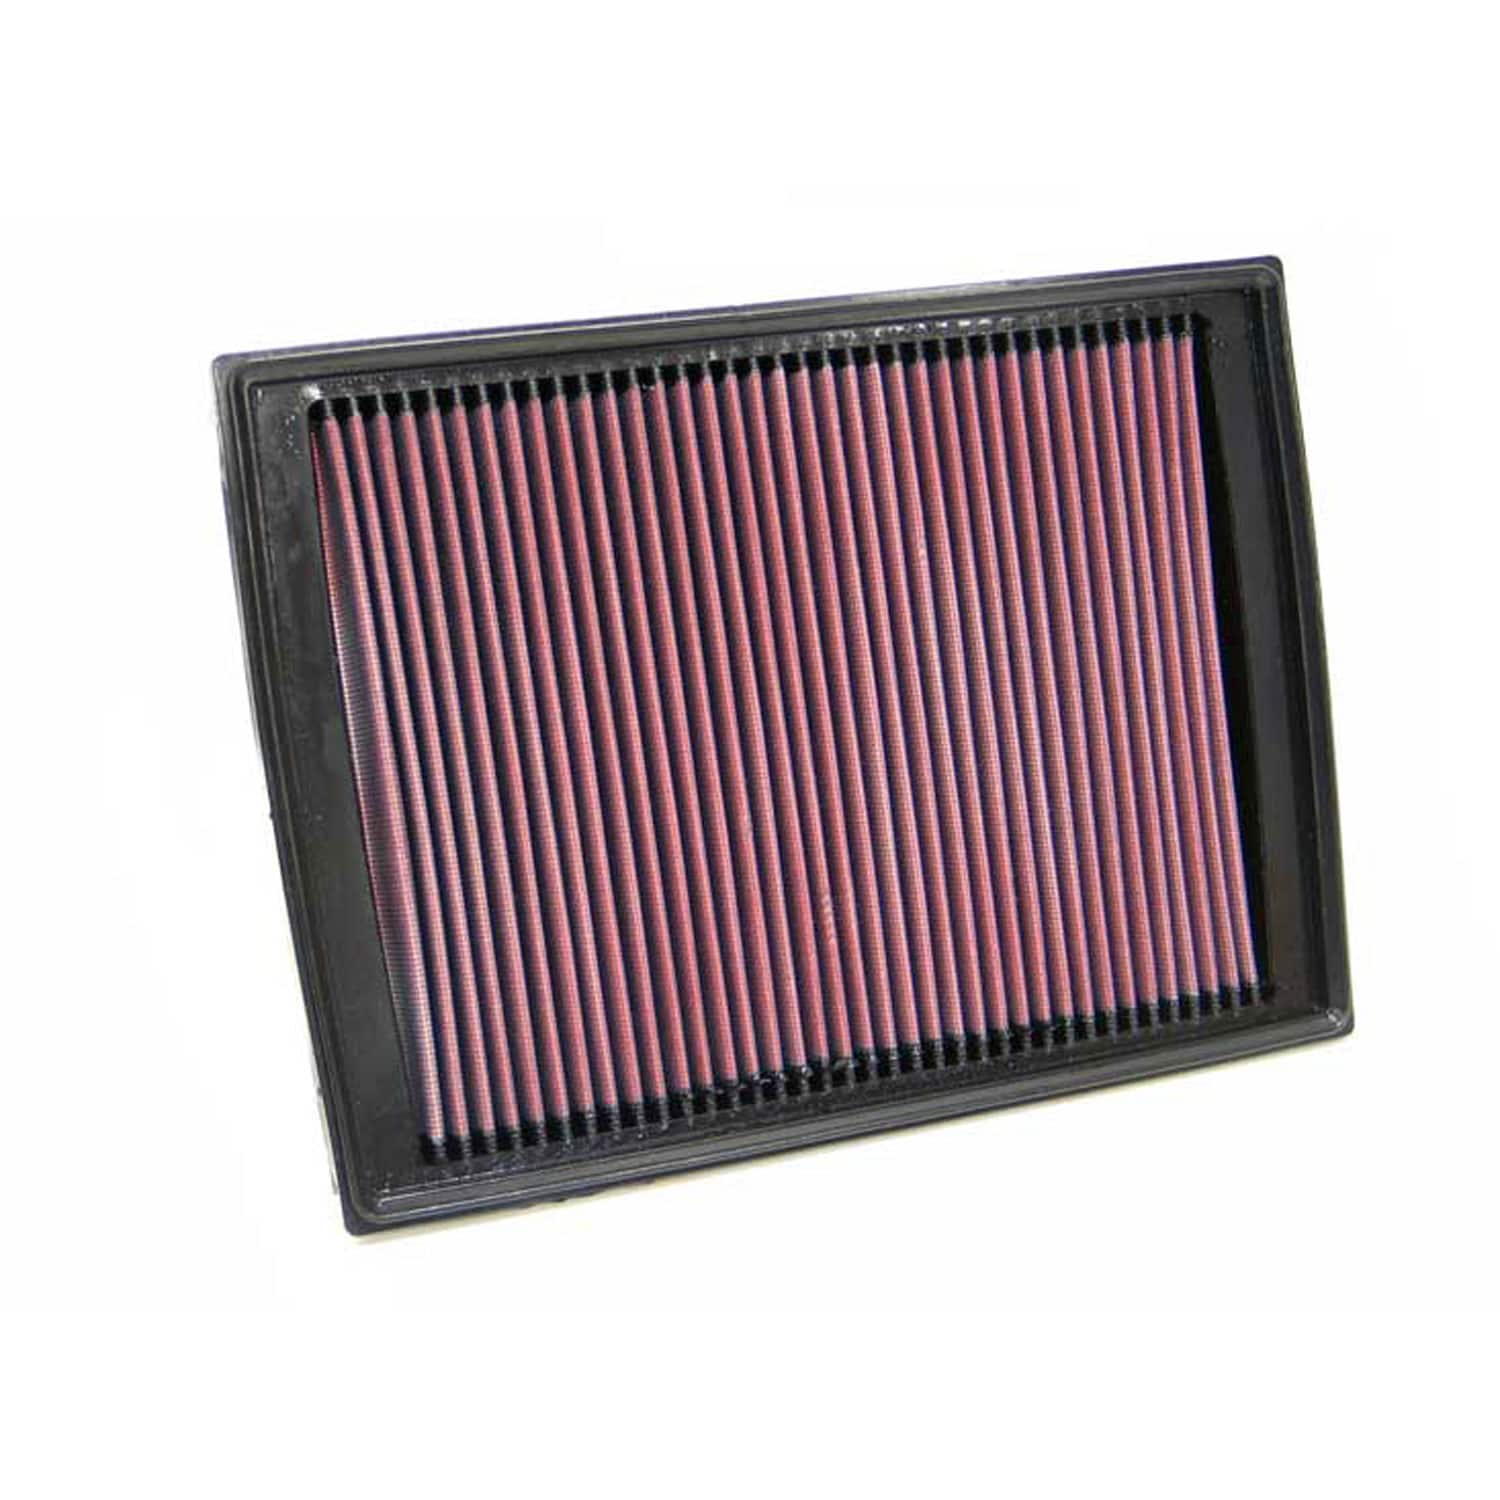 K&N K&N Engine Air Filter: High Performance, Premium, Washable, Replacement Filter: 2004-2017 Land Rover (Discovery IV, Range Rover Sport, Discovery III, LR3), 33-2333